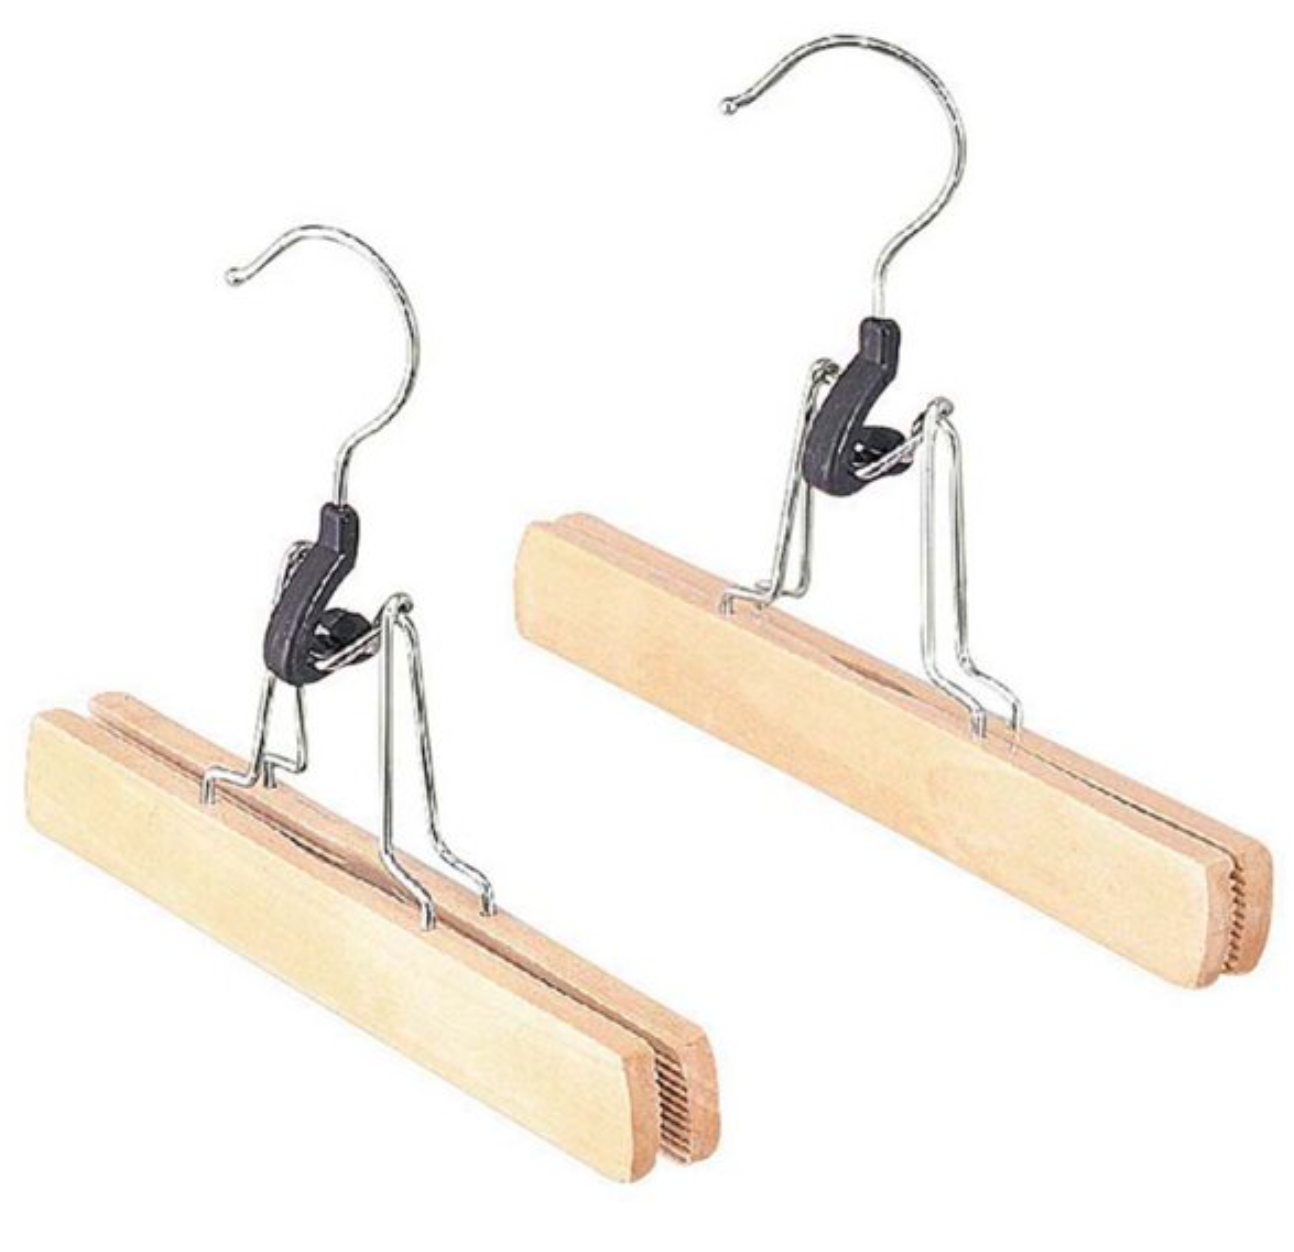 Natural Wood Clamp Slack Hangers – Set of Two